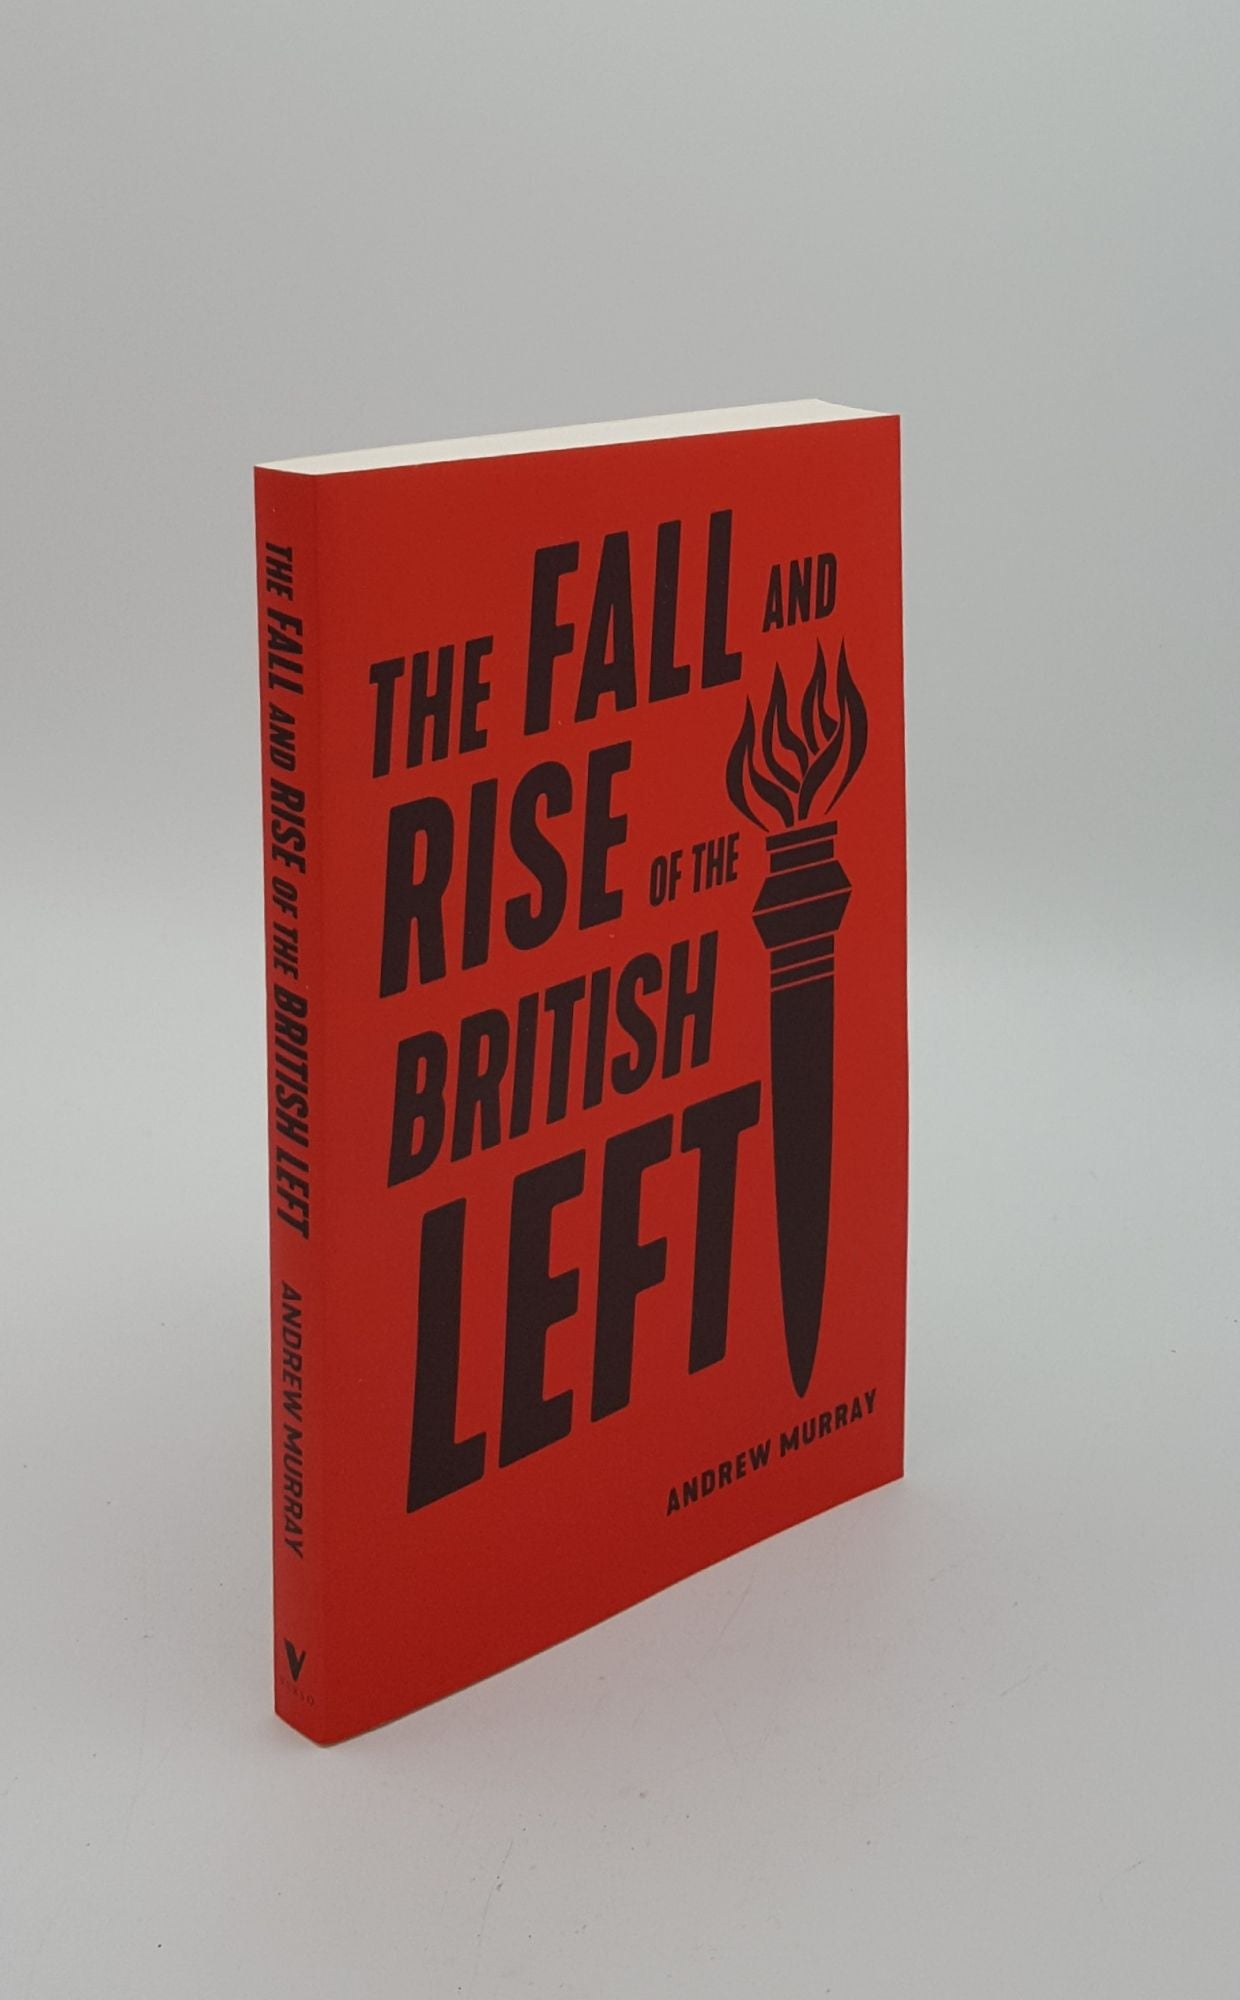 MURRAY Andrew - The Fall and Rise of the British Left